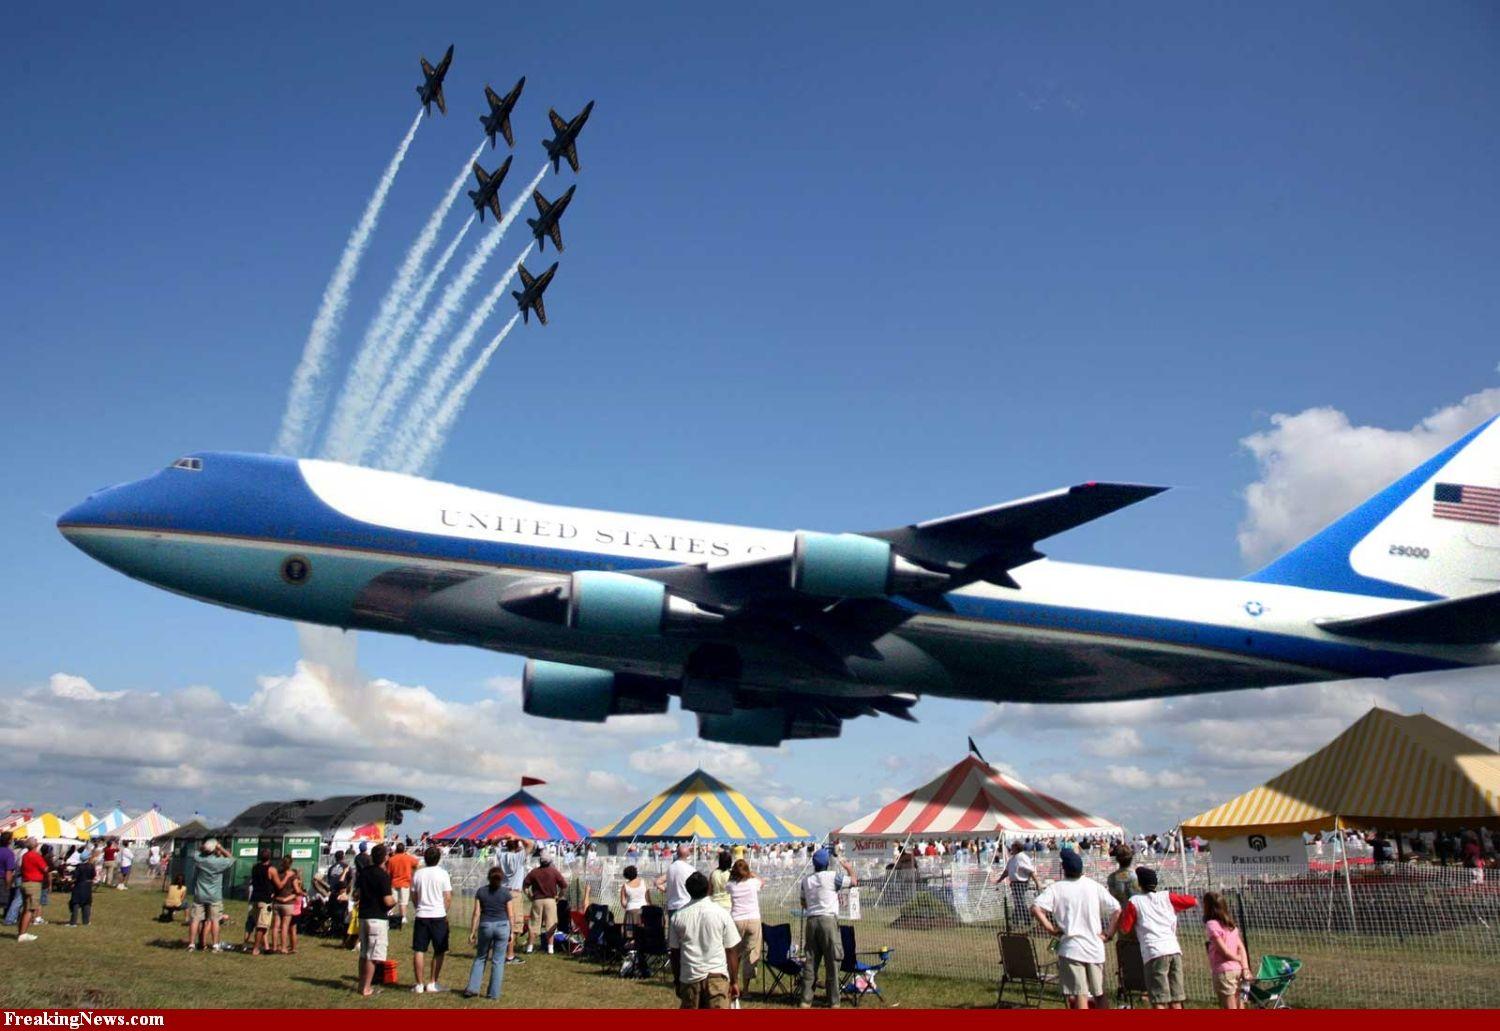 Air Force One at Air Show. THE NEED FOR SPEED!!